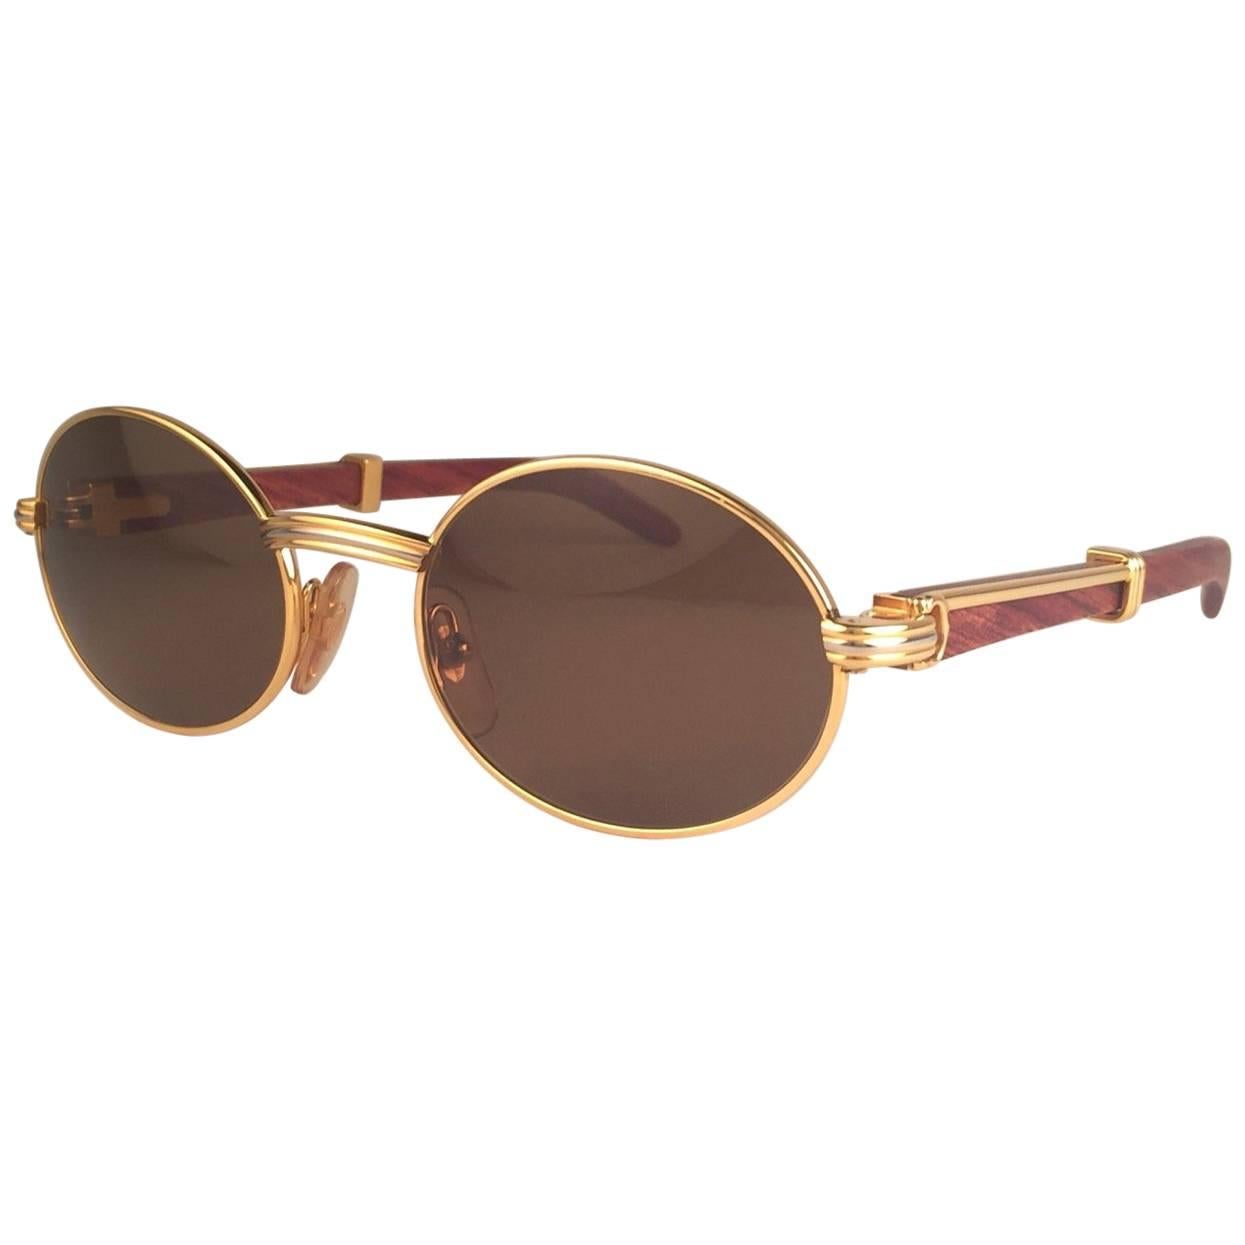 Cartier Sully New Gold and Wood 53/22 Full Set Brown Lens France Sunglasses In New Condition For Sale In Baleares, Baleares